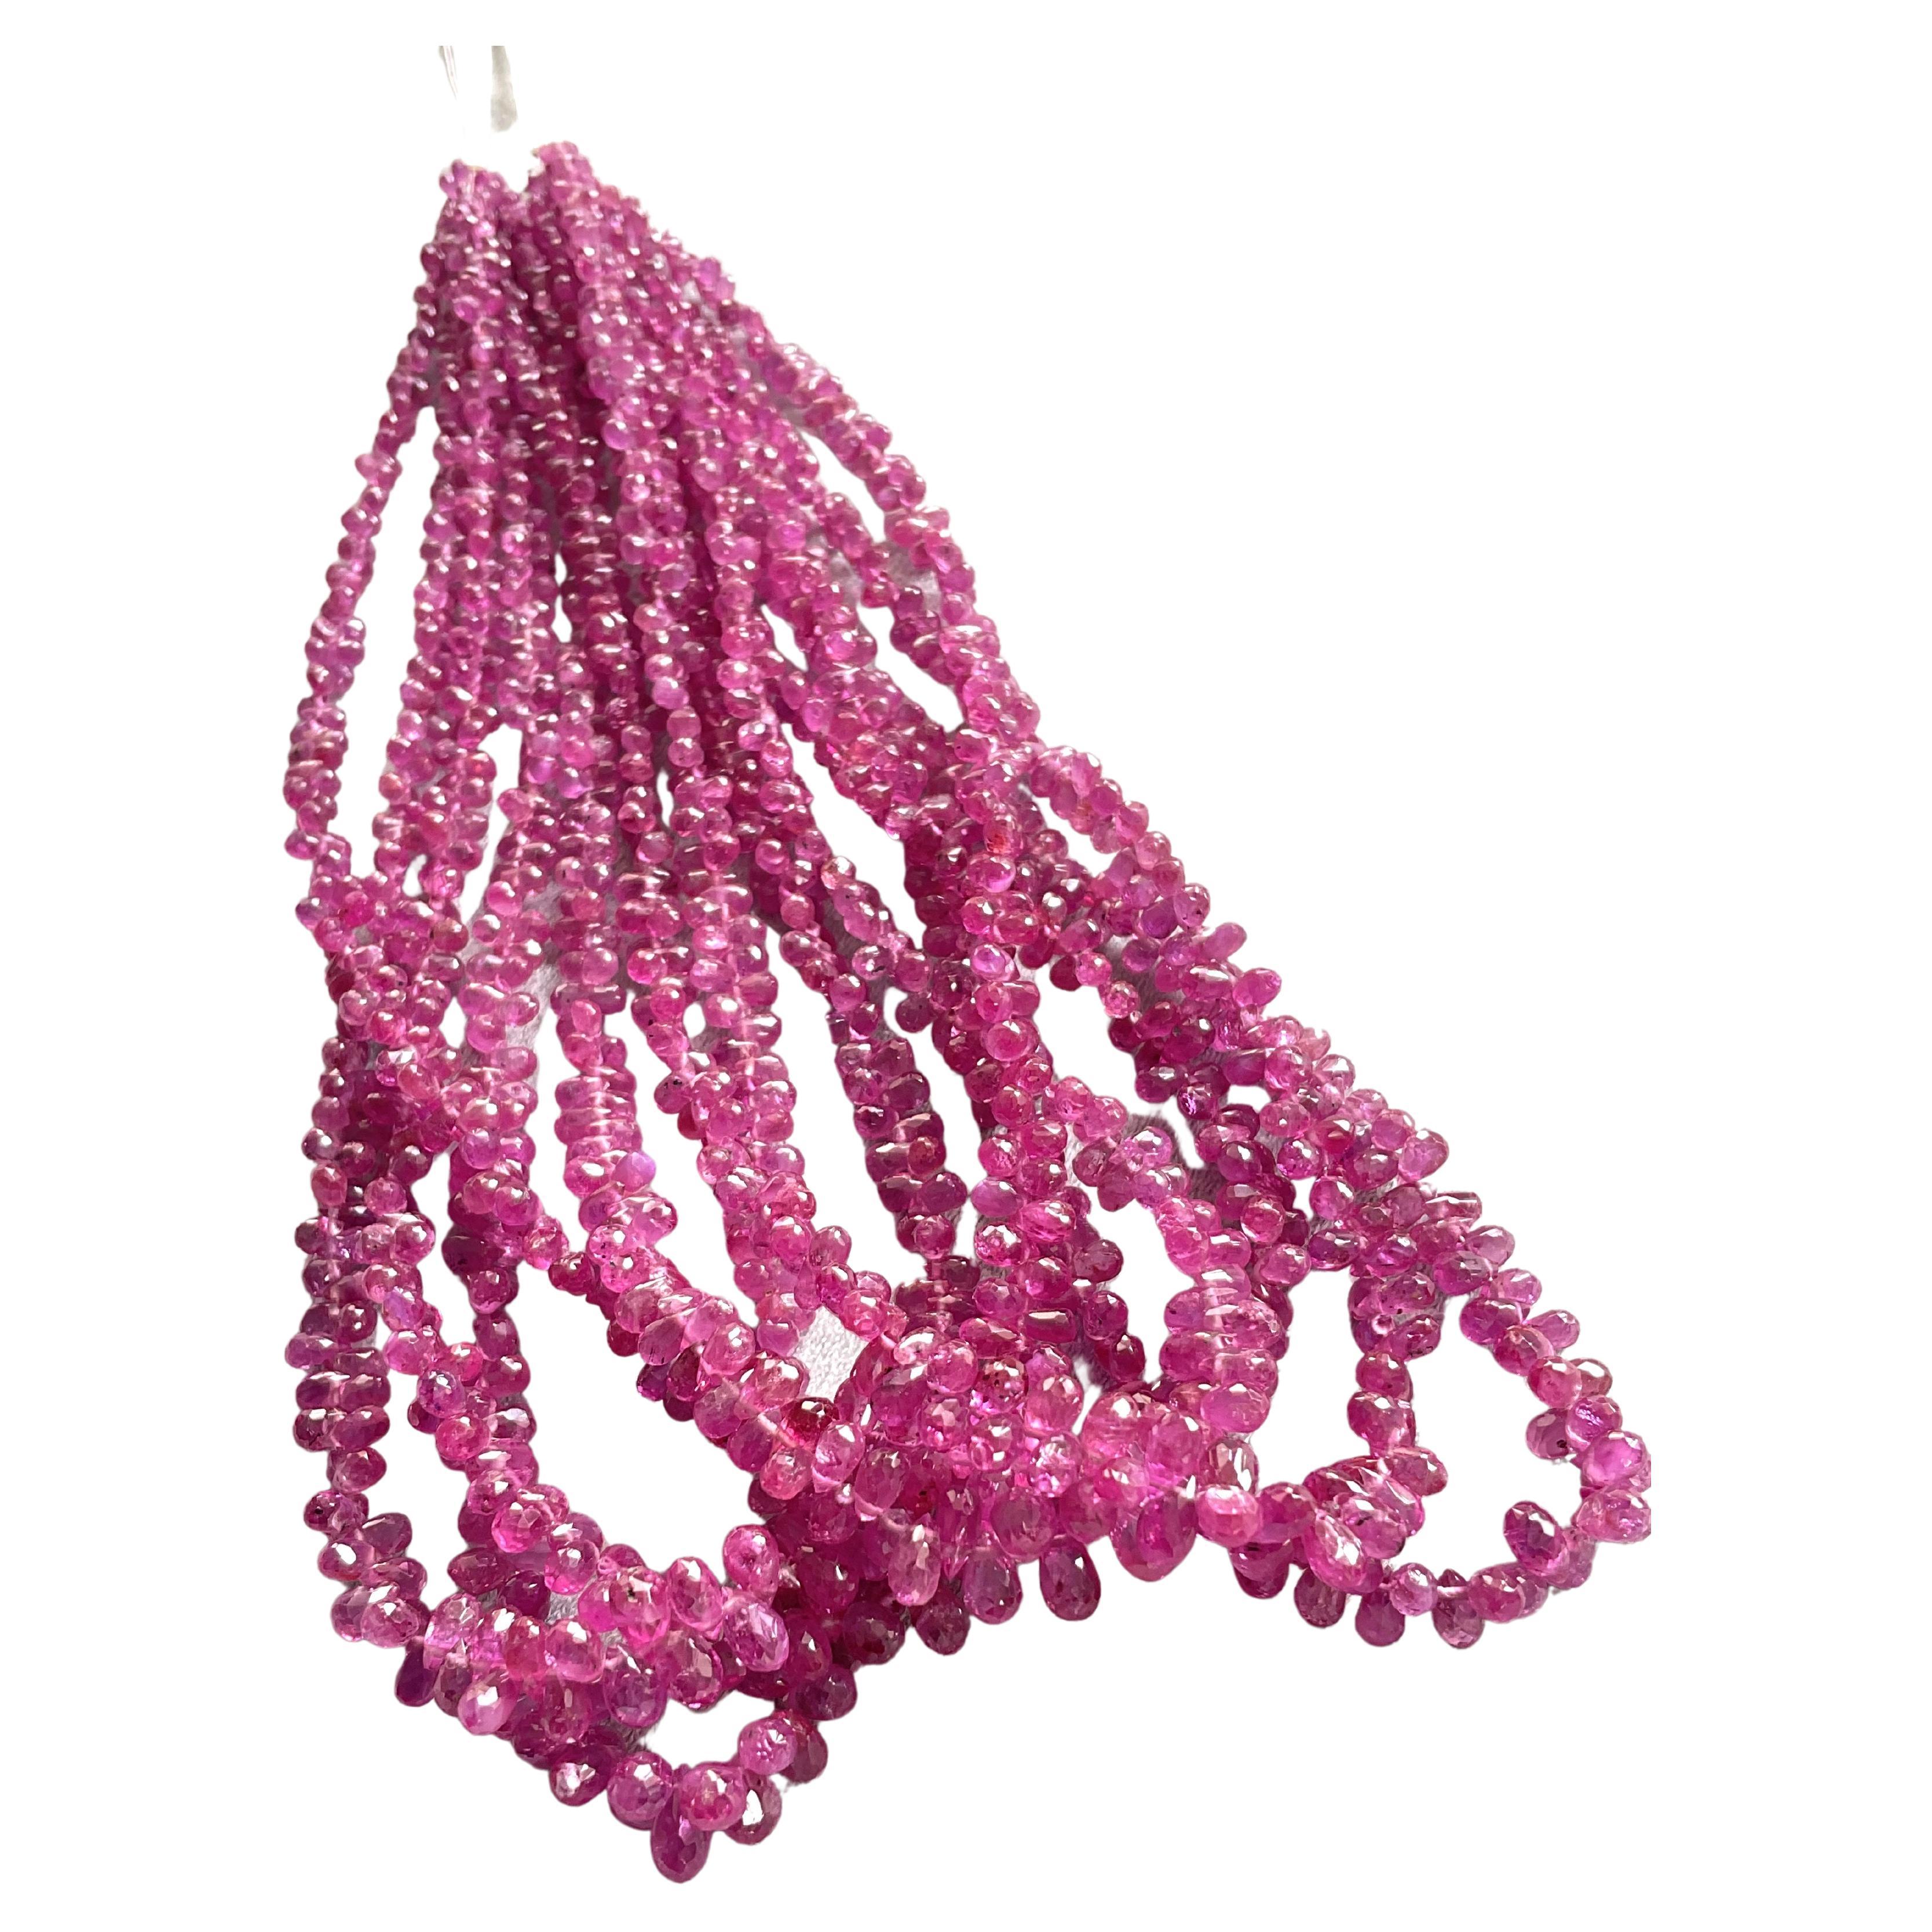 Gemstone - Ruby
HEAT ONLY
Weight -  296.91 Carats
Strand - 7
Size - 2x3 To 3x6 MM
Shape - Drops

